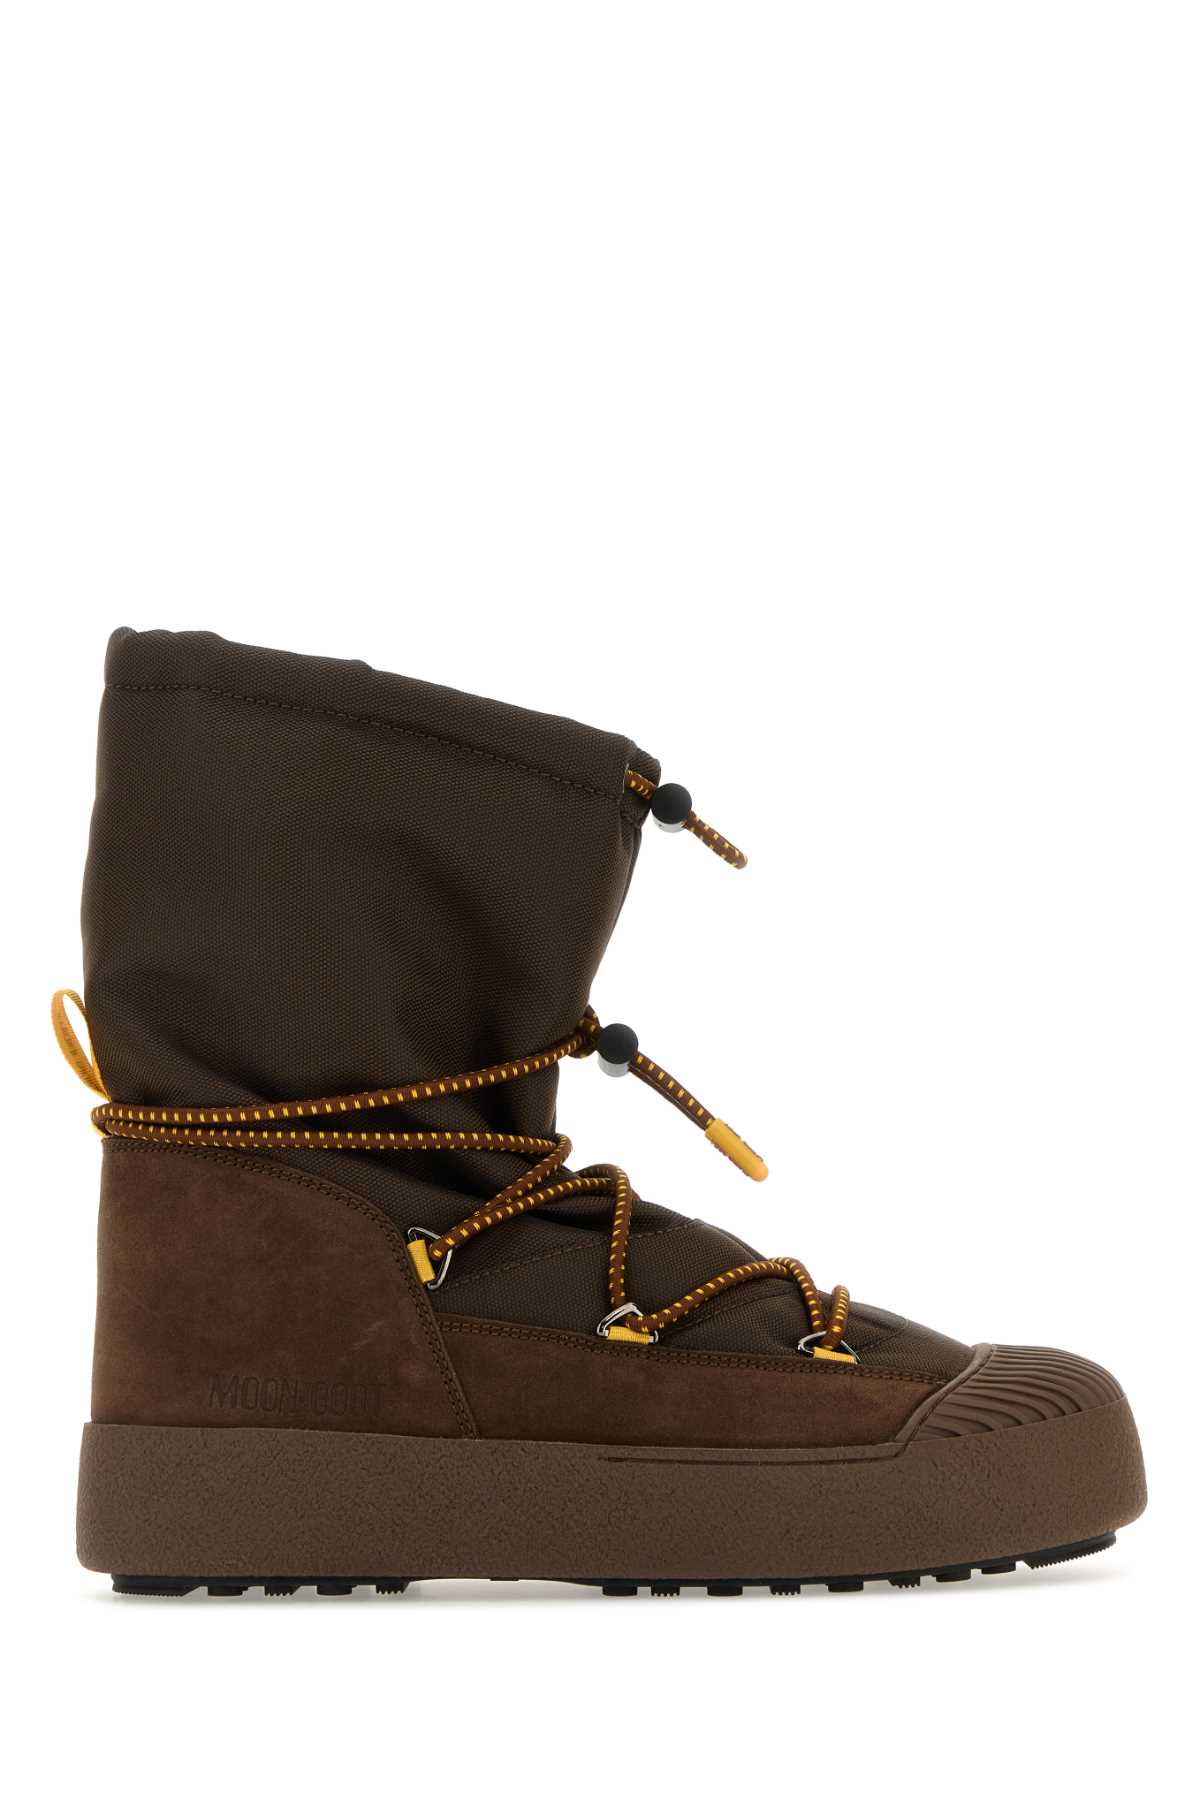 Shop Moon Boot Brown Mtrack Polor Cordy Boots